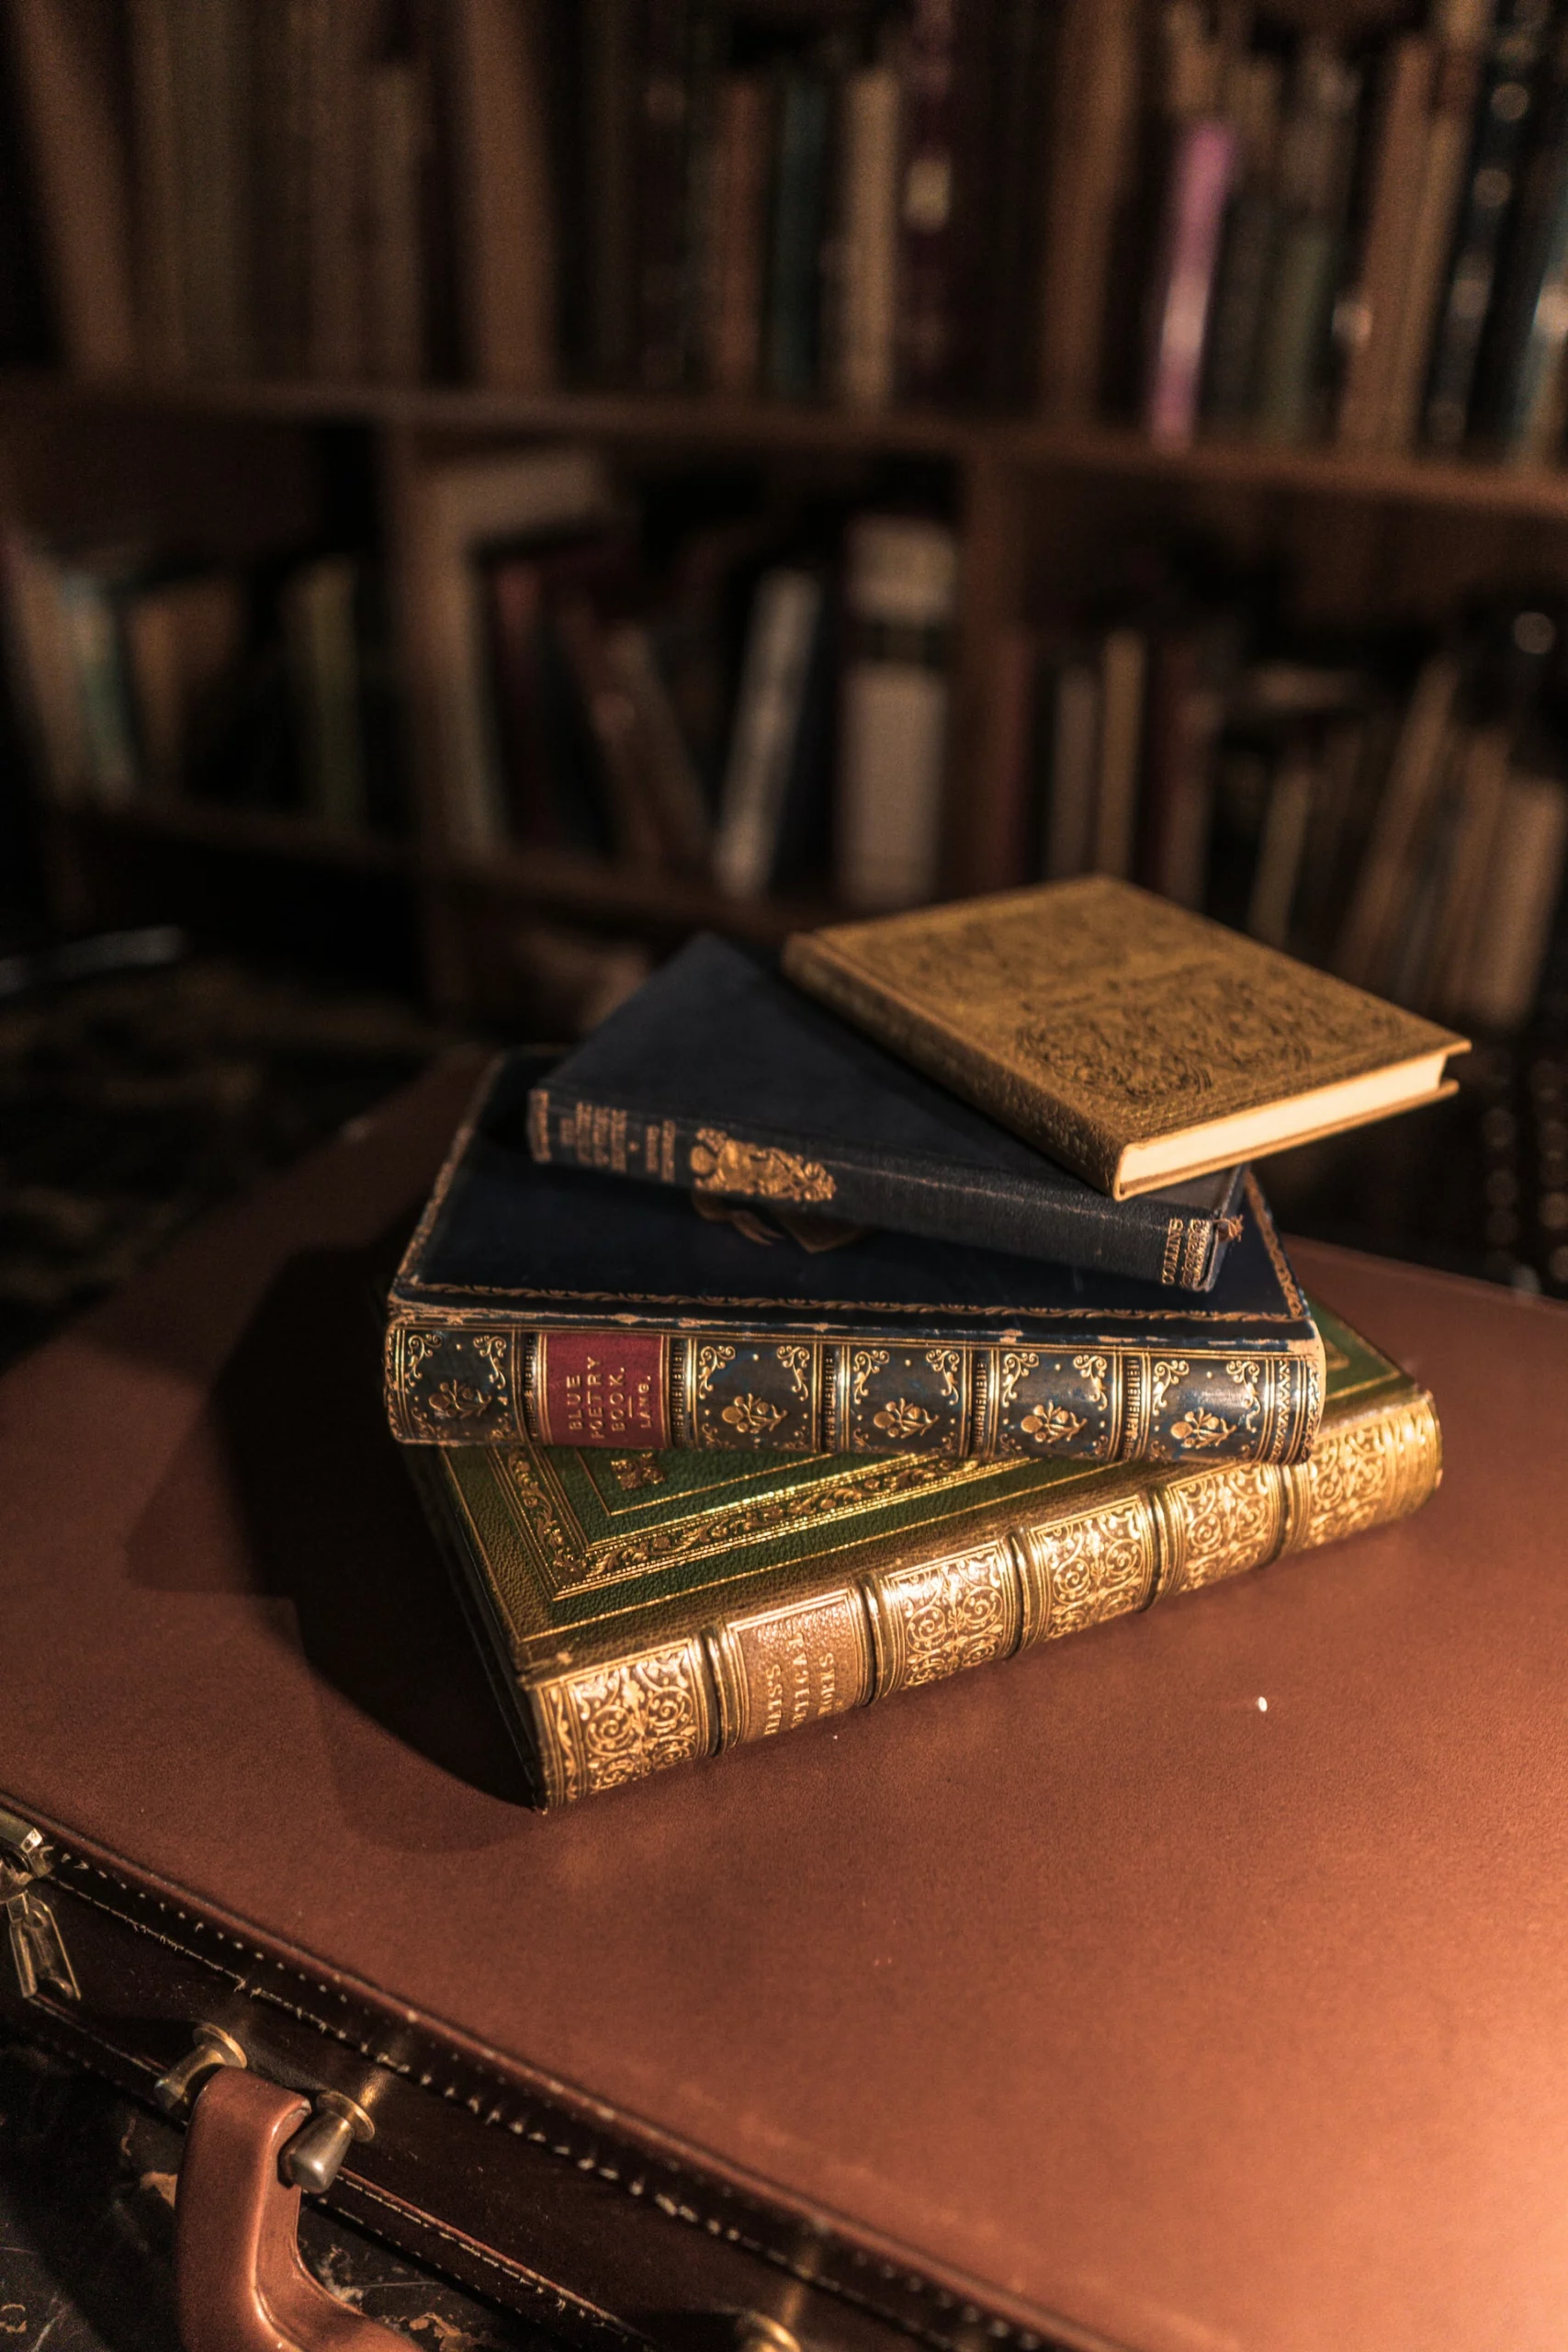 How to Determine the Value of Old Books - Antique Book Prices